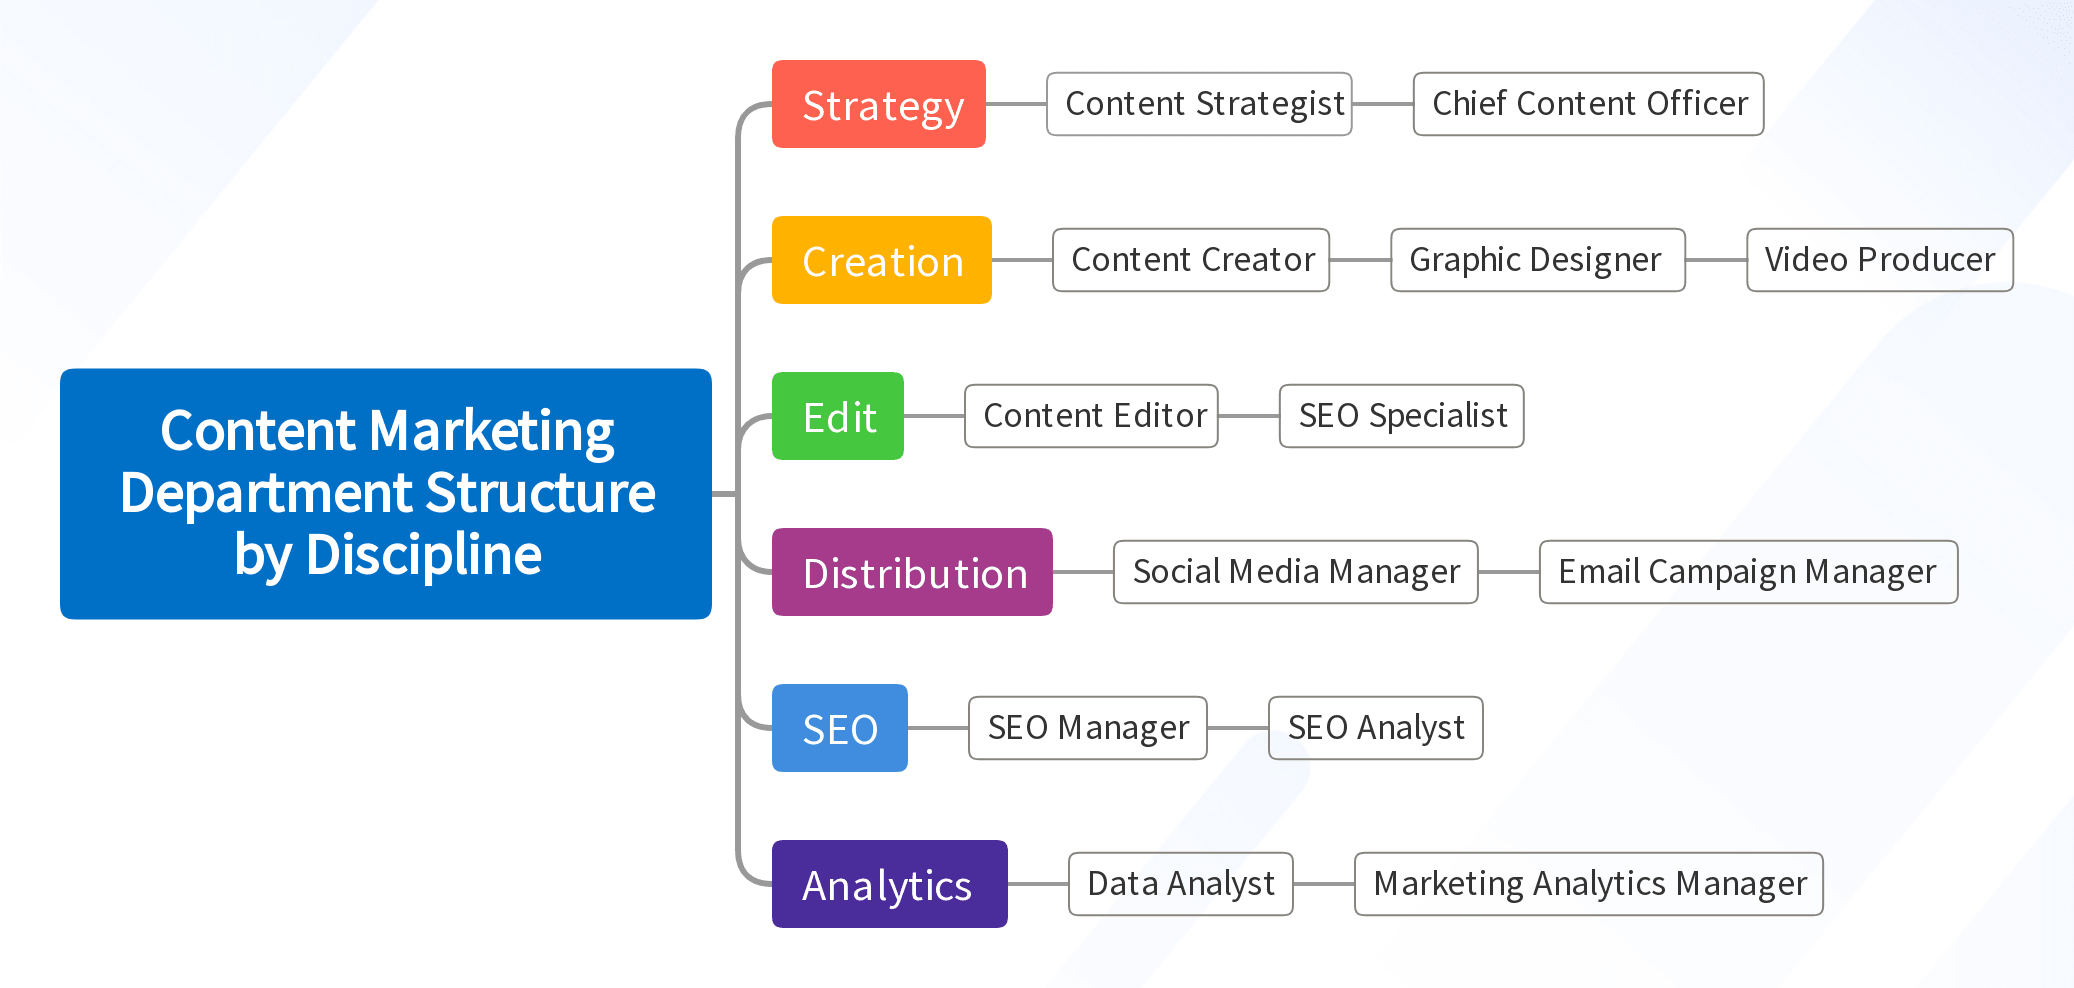 Content Marketing Department Structure by Discipline